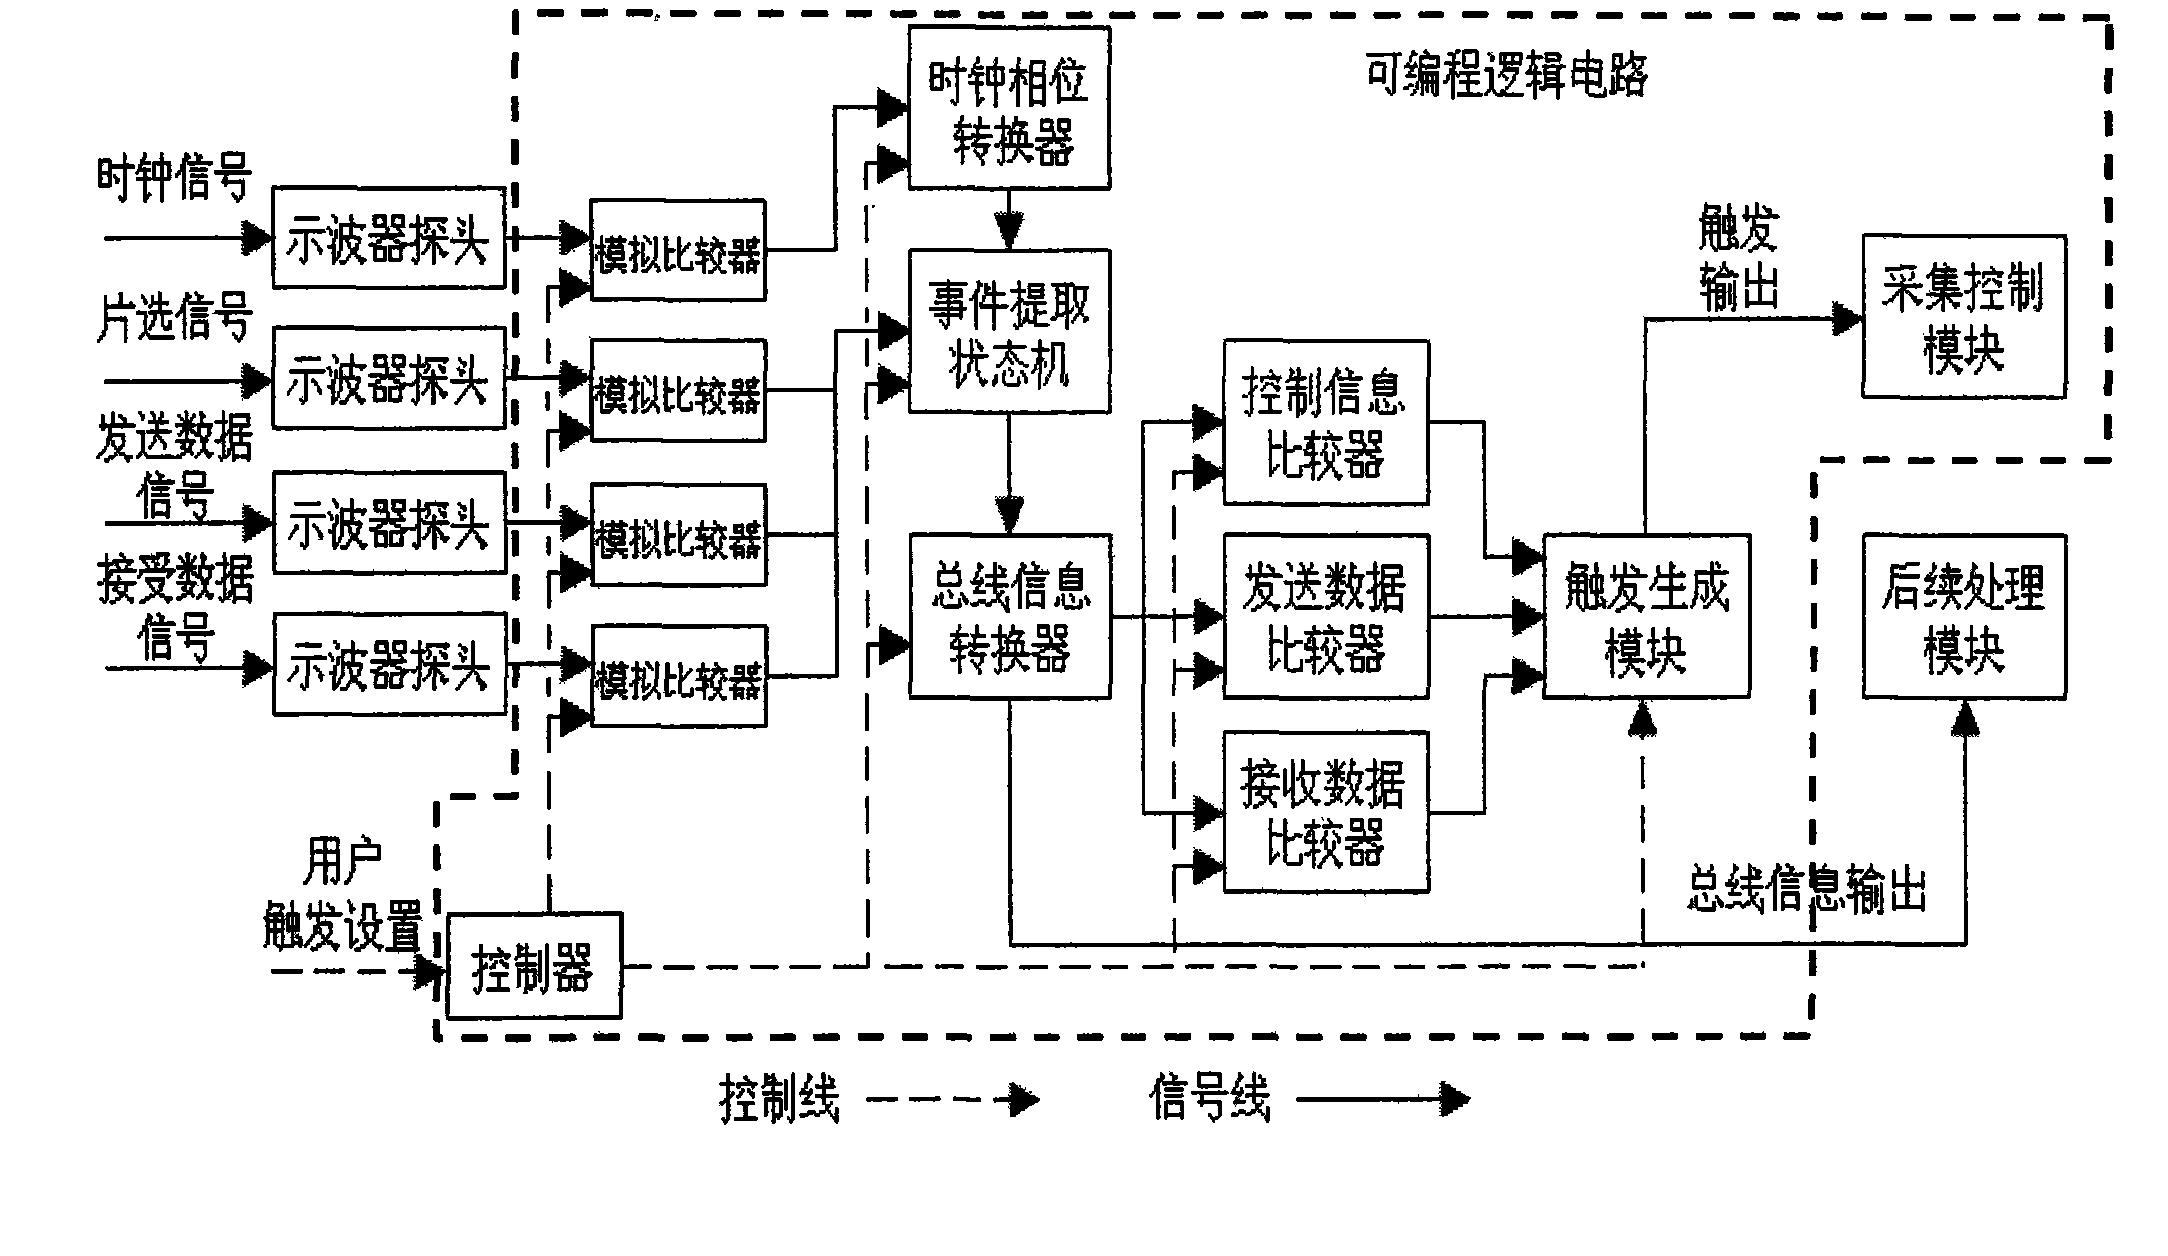 Triggering method for serial peripheral interface bus signal